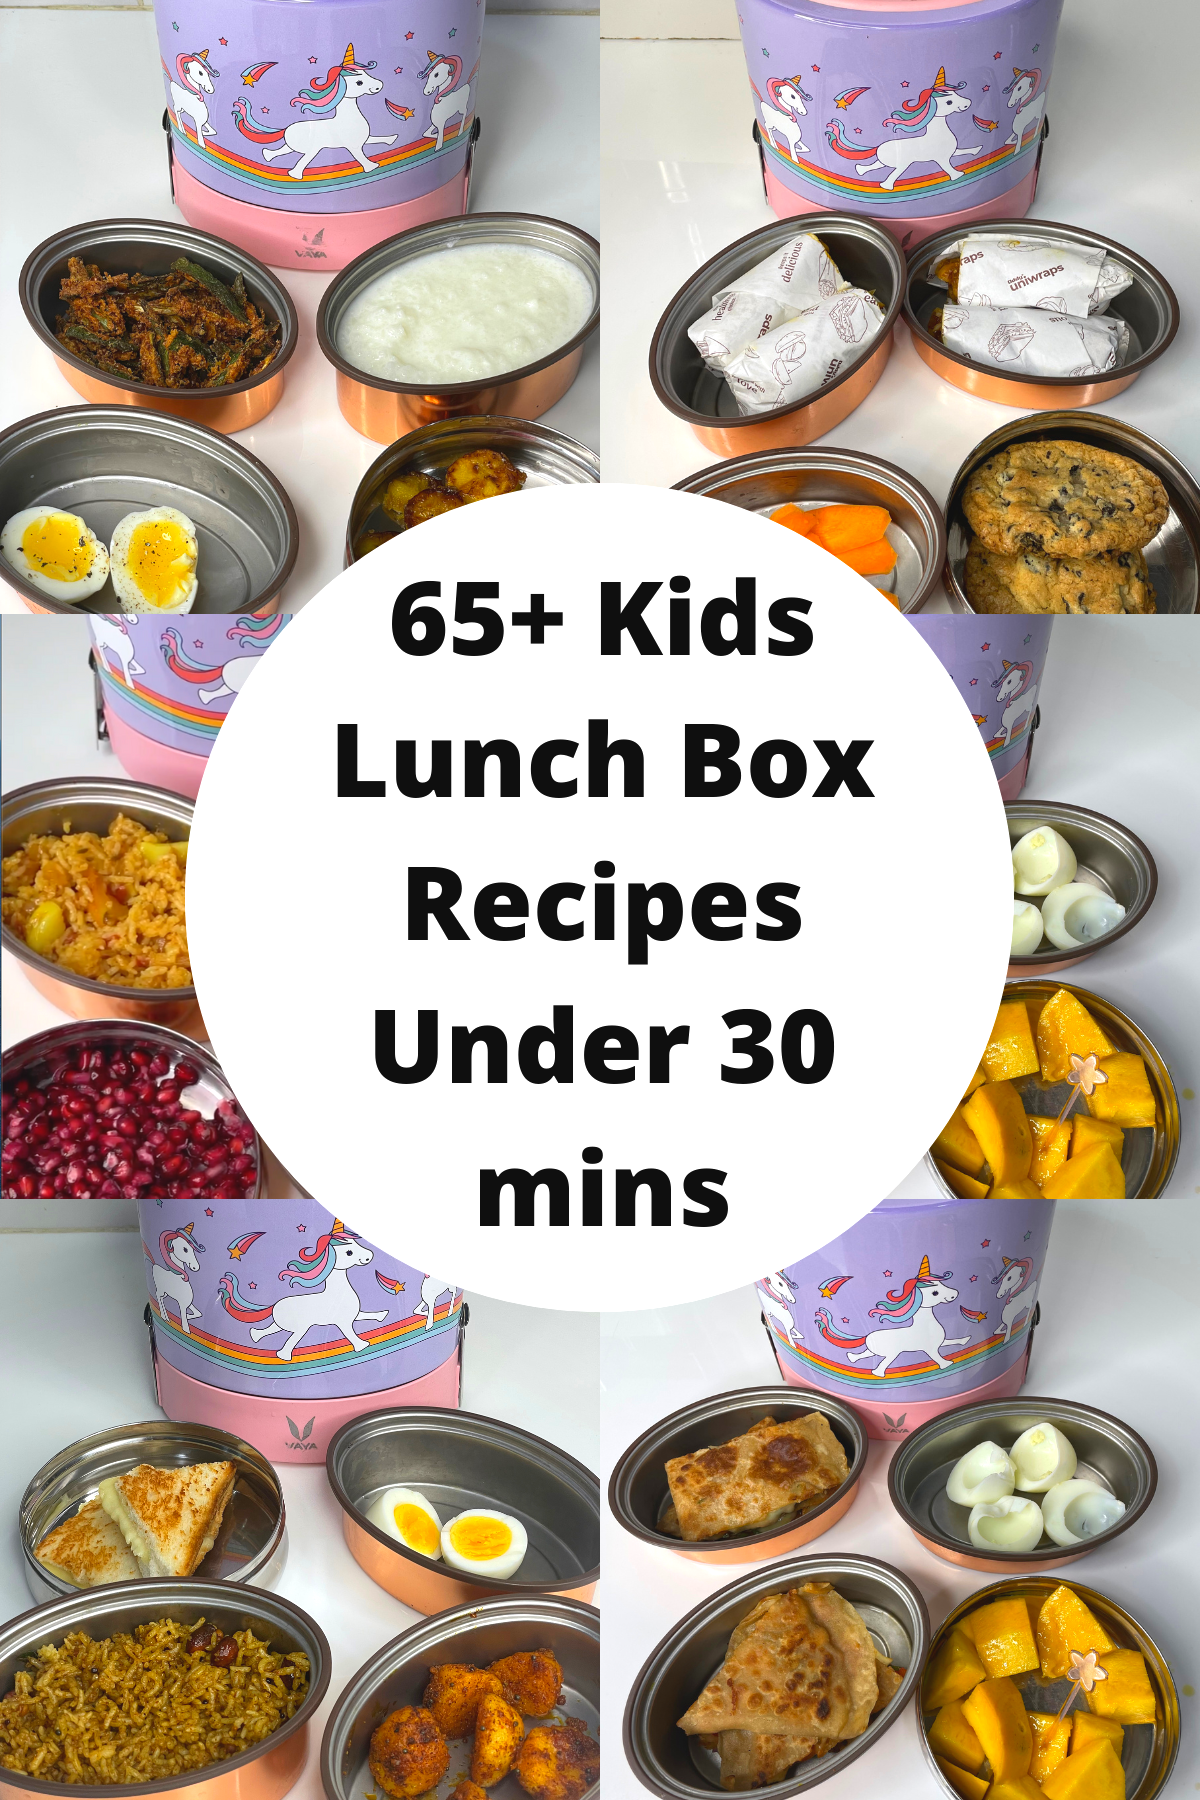 Best Lunch Box Ever: Ideas and Recipes for School Lunches Kids Will Love [Book]